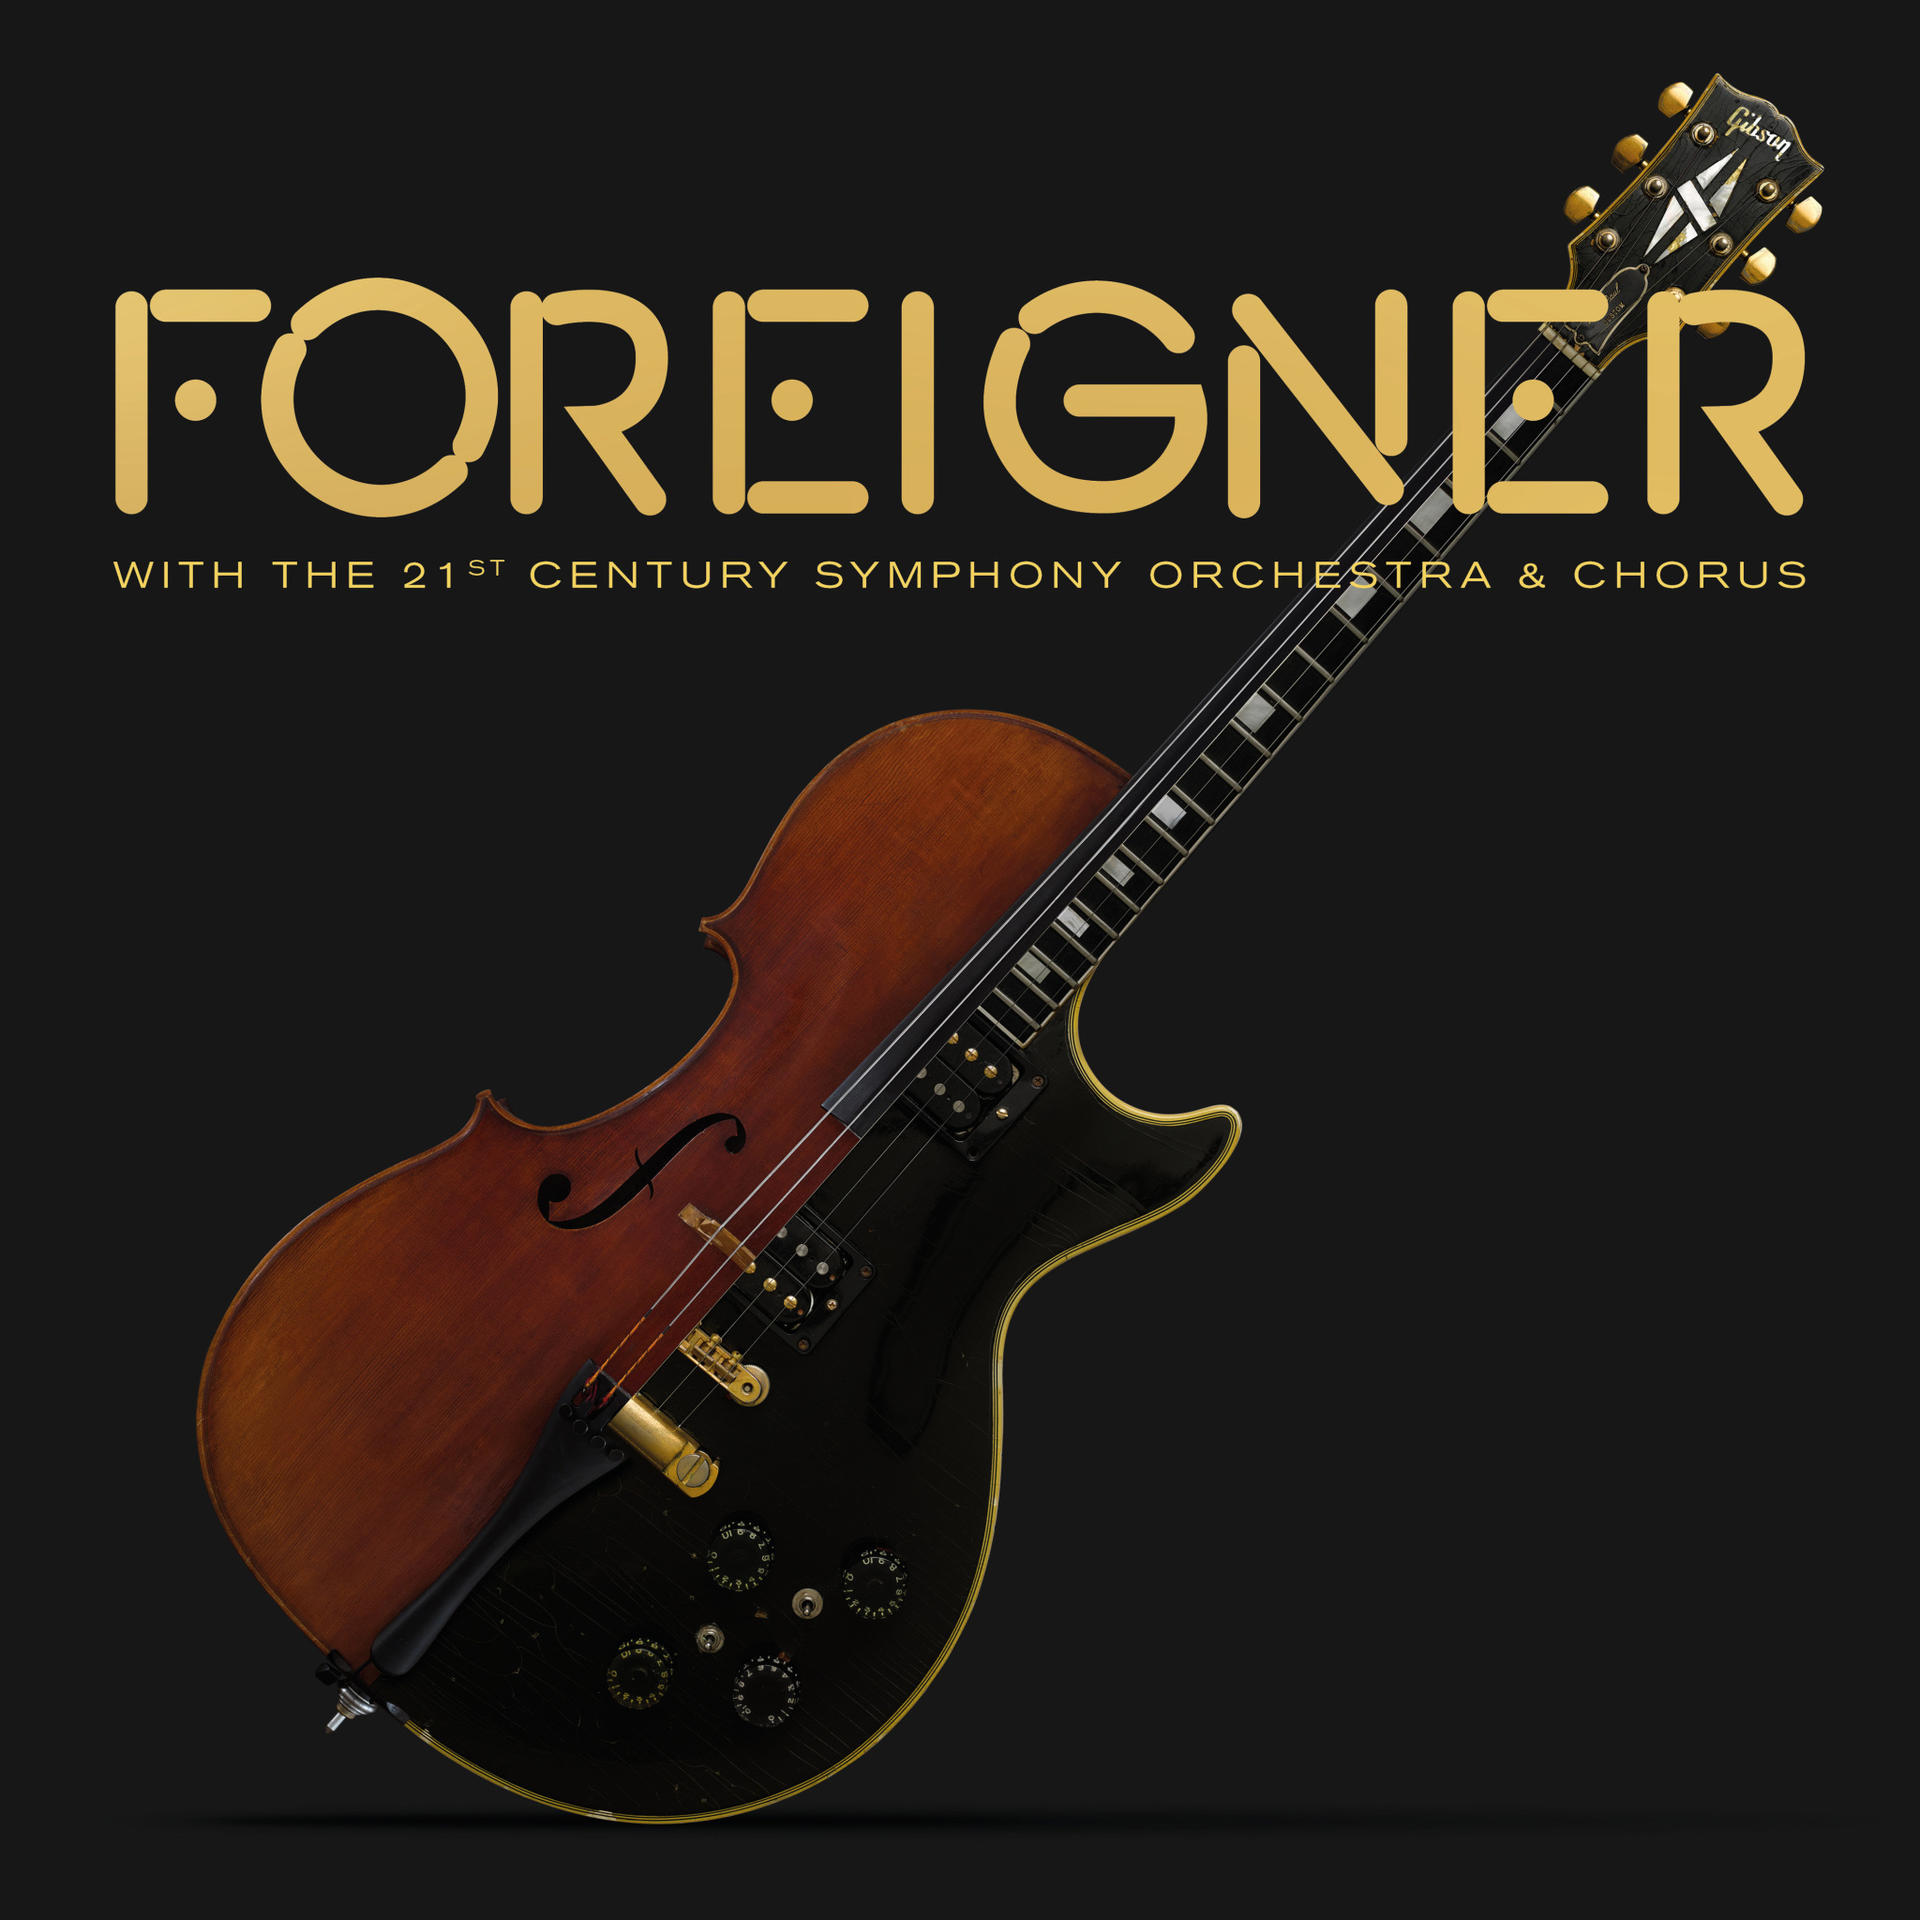 Foreigner - With The Century (Vinyl) & Orchestra - Symphony 21st Chorus